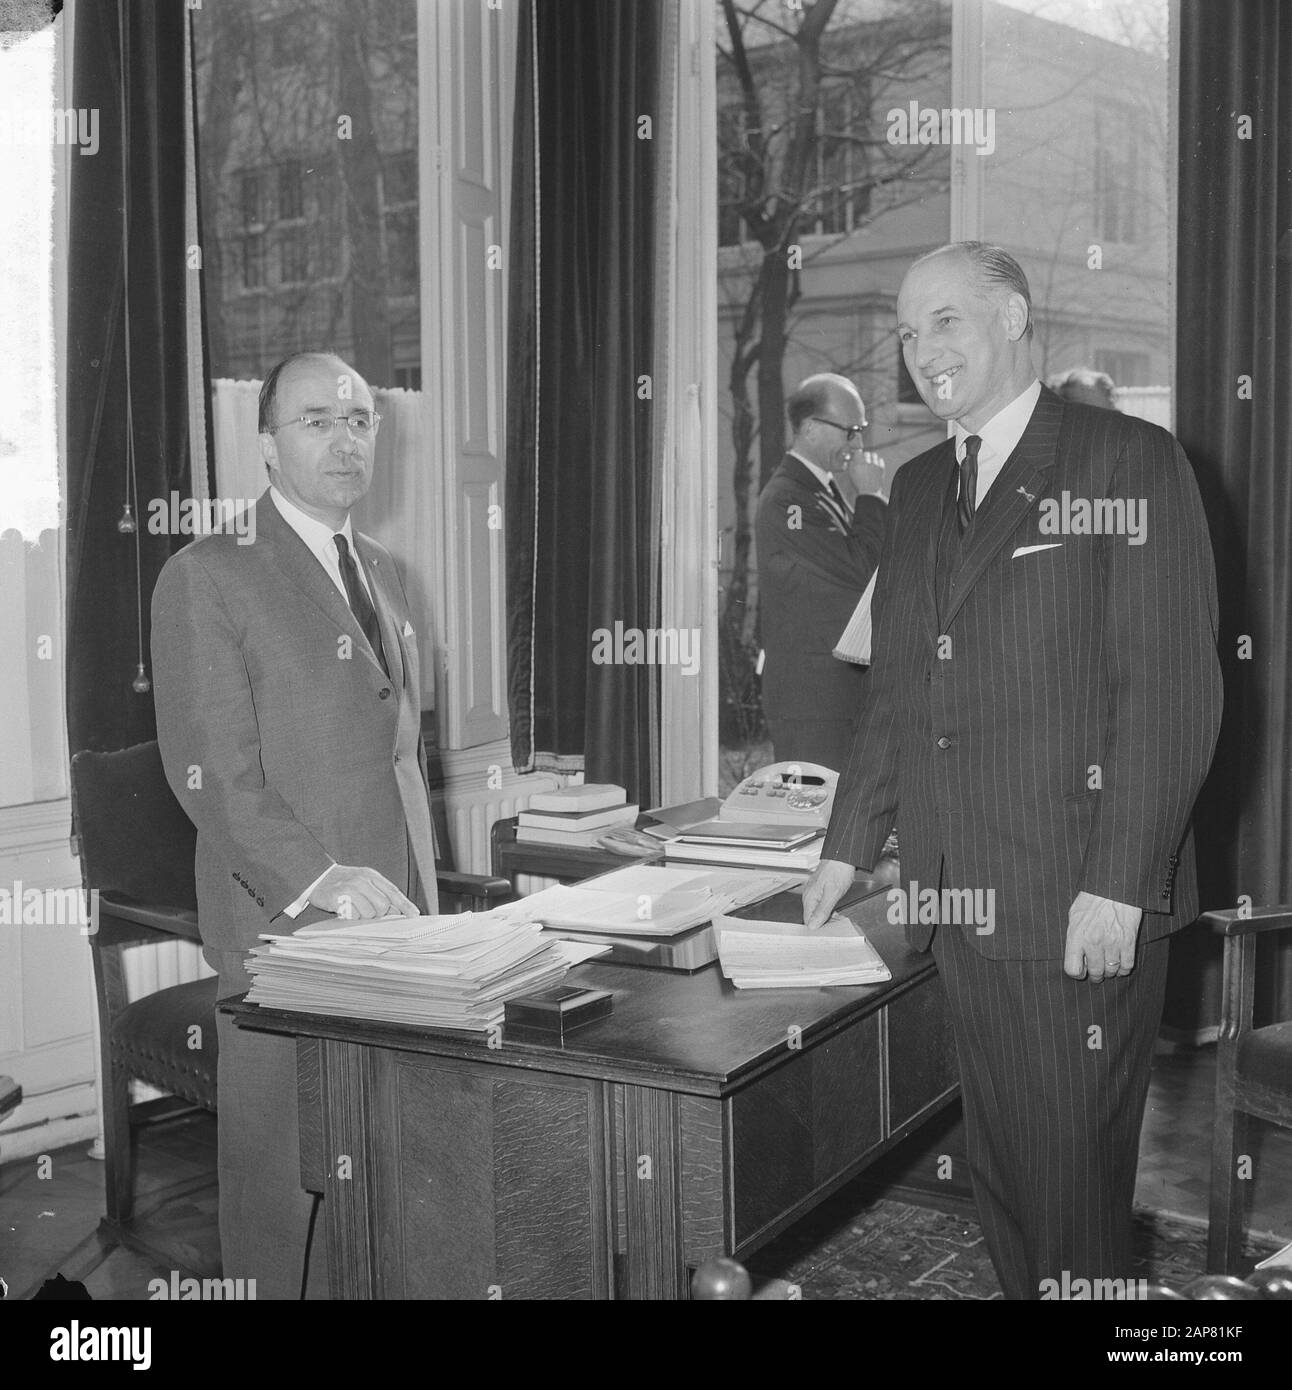 The cabinet crisis, formateur mr. Th. Cals (left) in conversation with Minister Bot of Education, Arts and Sciences Date: 22 March 1965 Location: The Hague, Zuid-Holland Keywords: conversations, cabinets, ministers Personname: Bot, Theo, Cals Th. Stock Photo